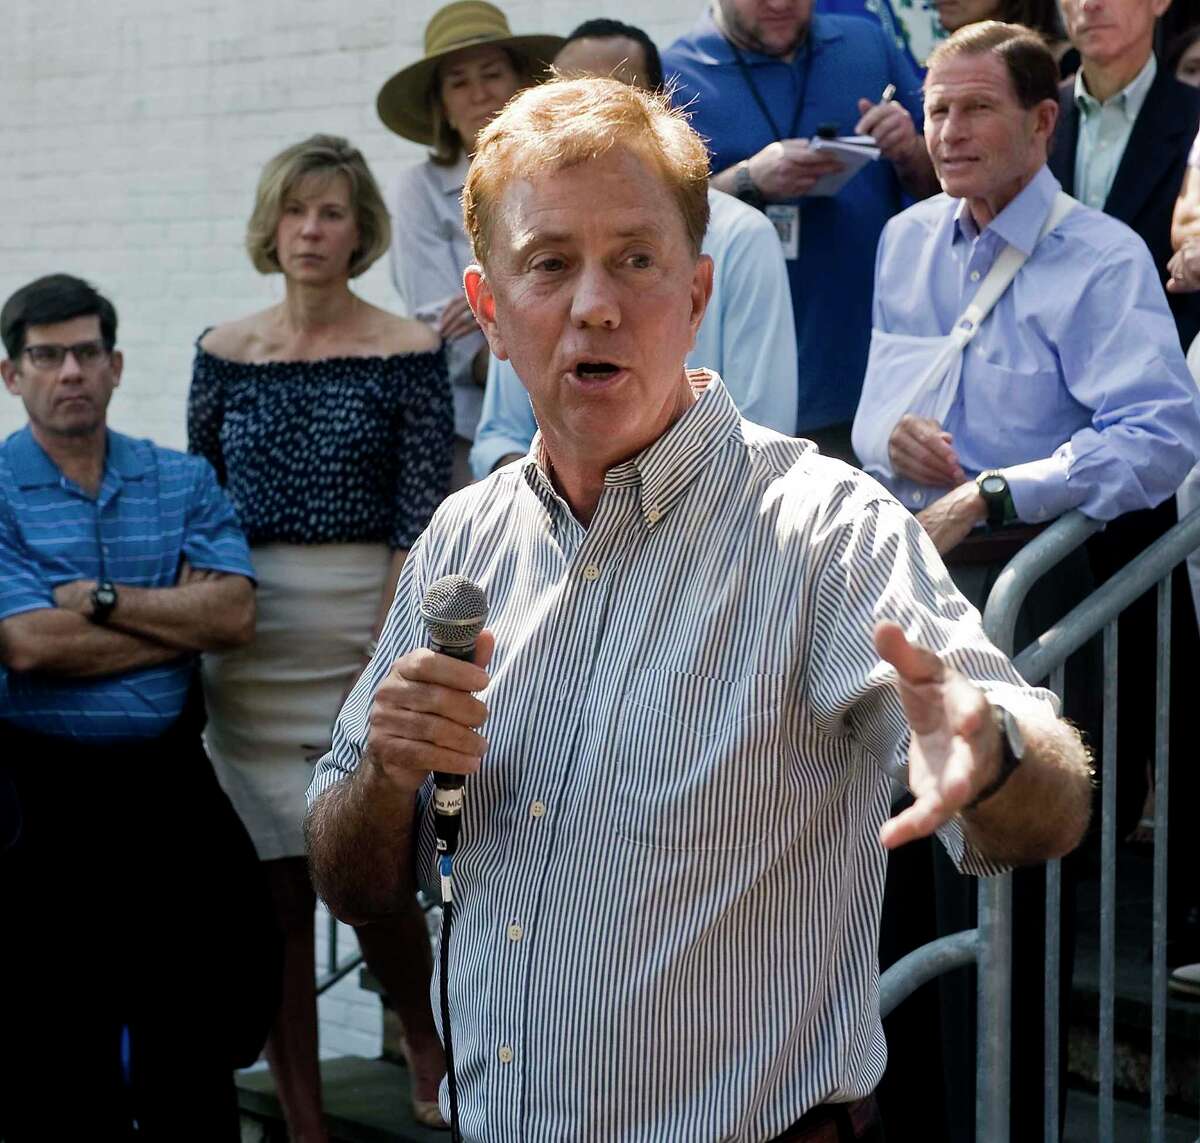 Gov. Ned Lamont will look to motivate the party faithful when he and other Democratic candidates speak at the Democratic Town Committee’s annual picnic on Sept. 18.